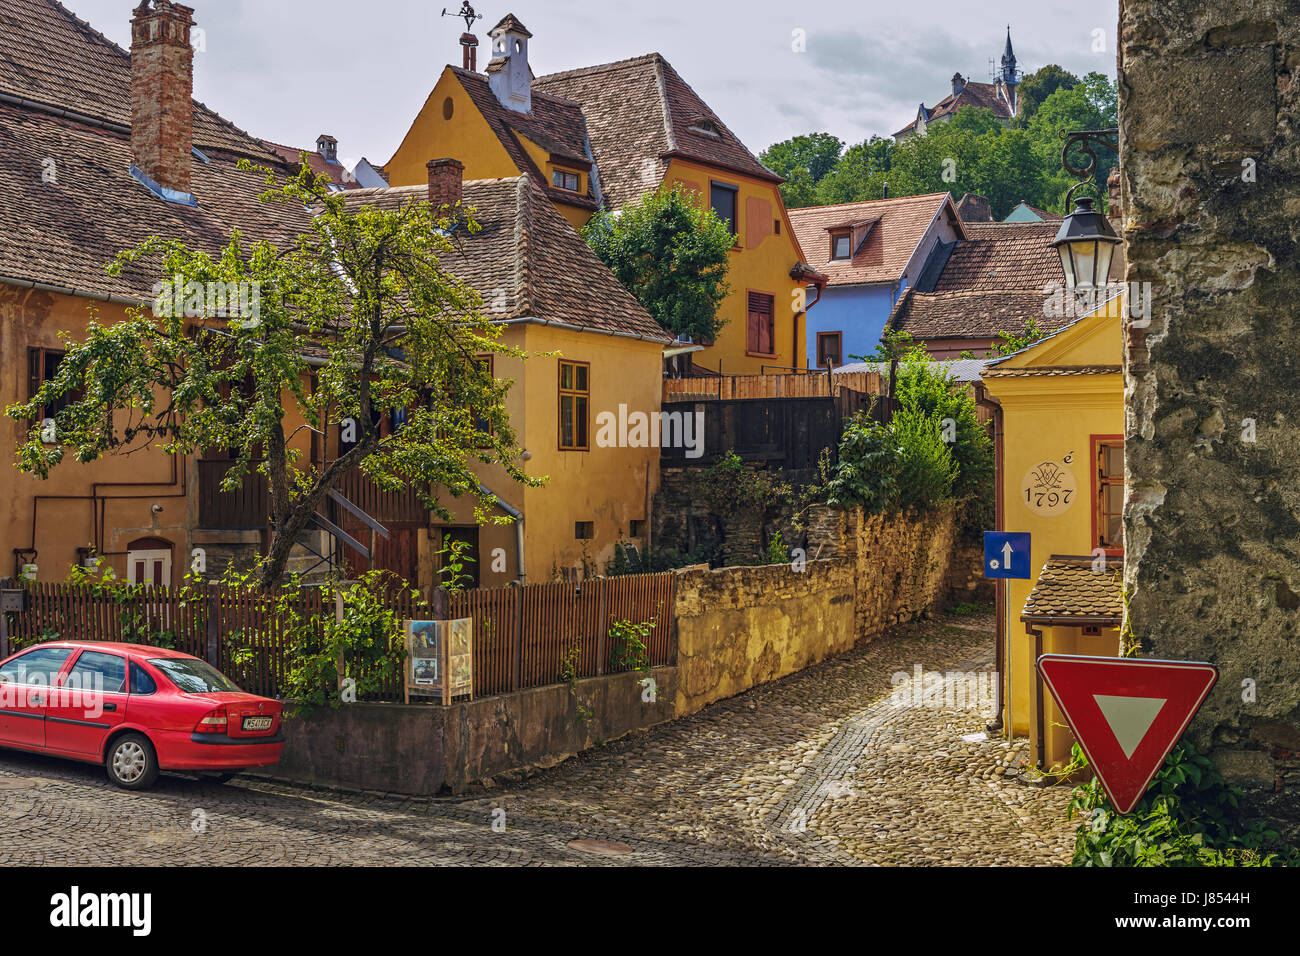 Sighisoara, Romania - July 26, 2014: Old residential district in the historic center of Sighisoara, one of the few still inhabited citadels in Europe. Stock Photo